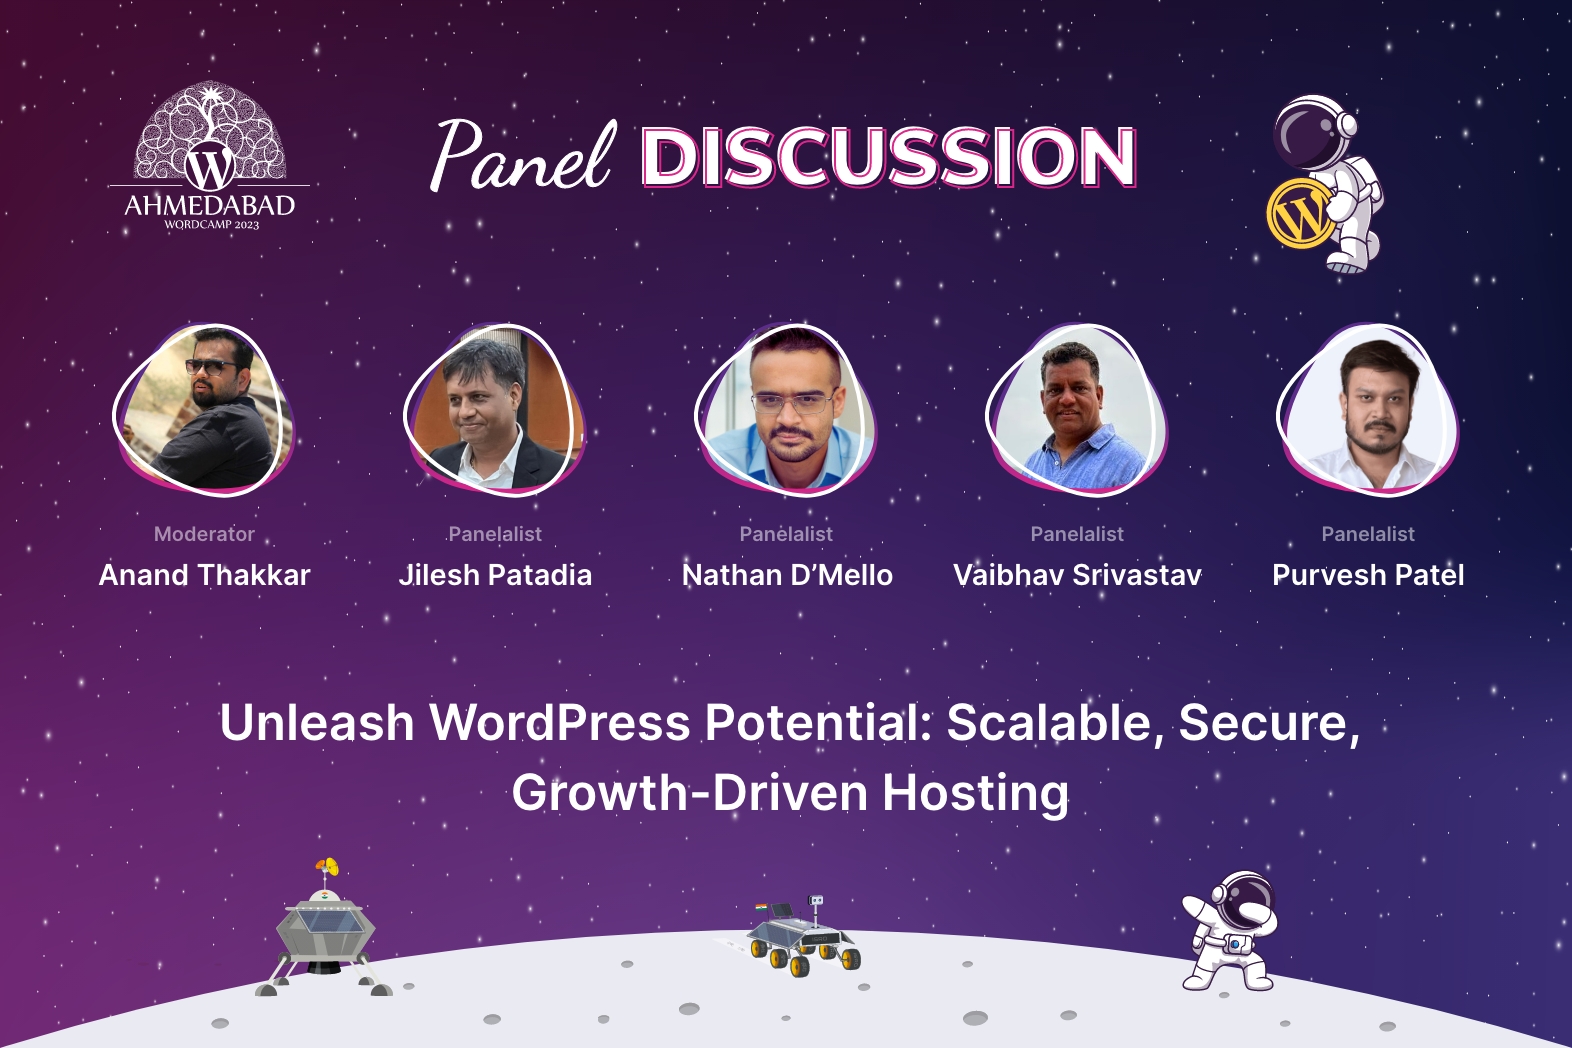 Panel Discussion – Unleash WordPress Potential: Scalable, Secure, Growth-Driven Hosting